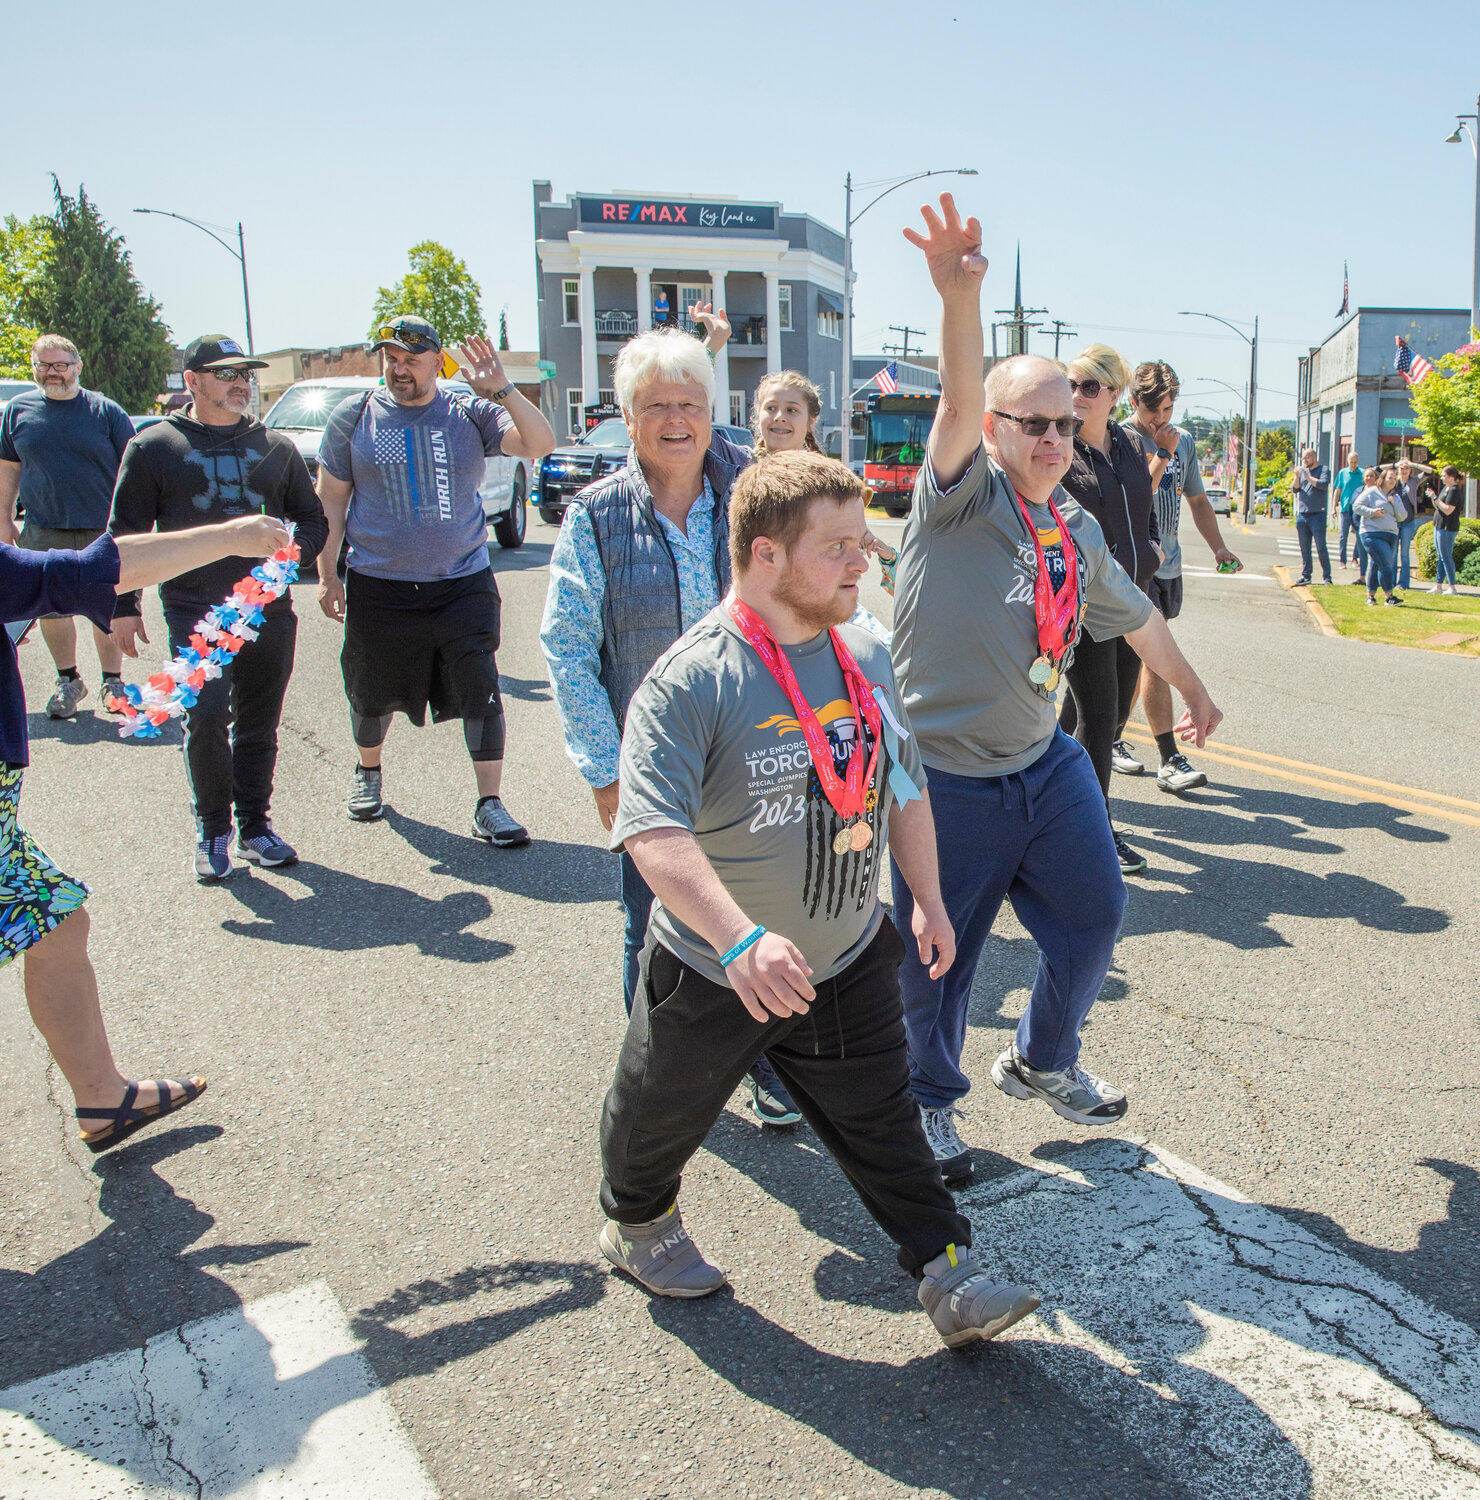 Participants wave to supporters during the Lewis County Special Olympics Law Enforcement Torch Run in downtown Chehalis on Friday, June 2.